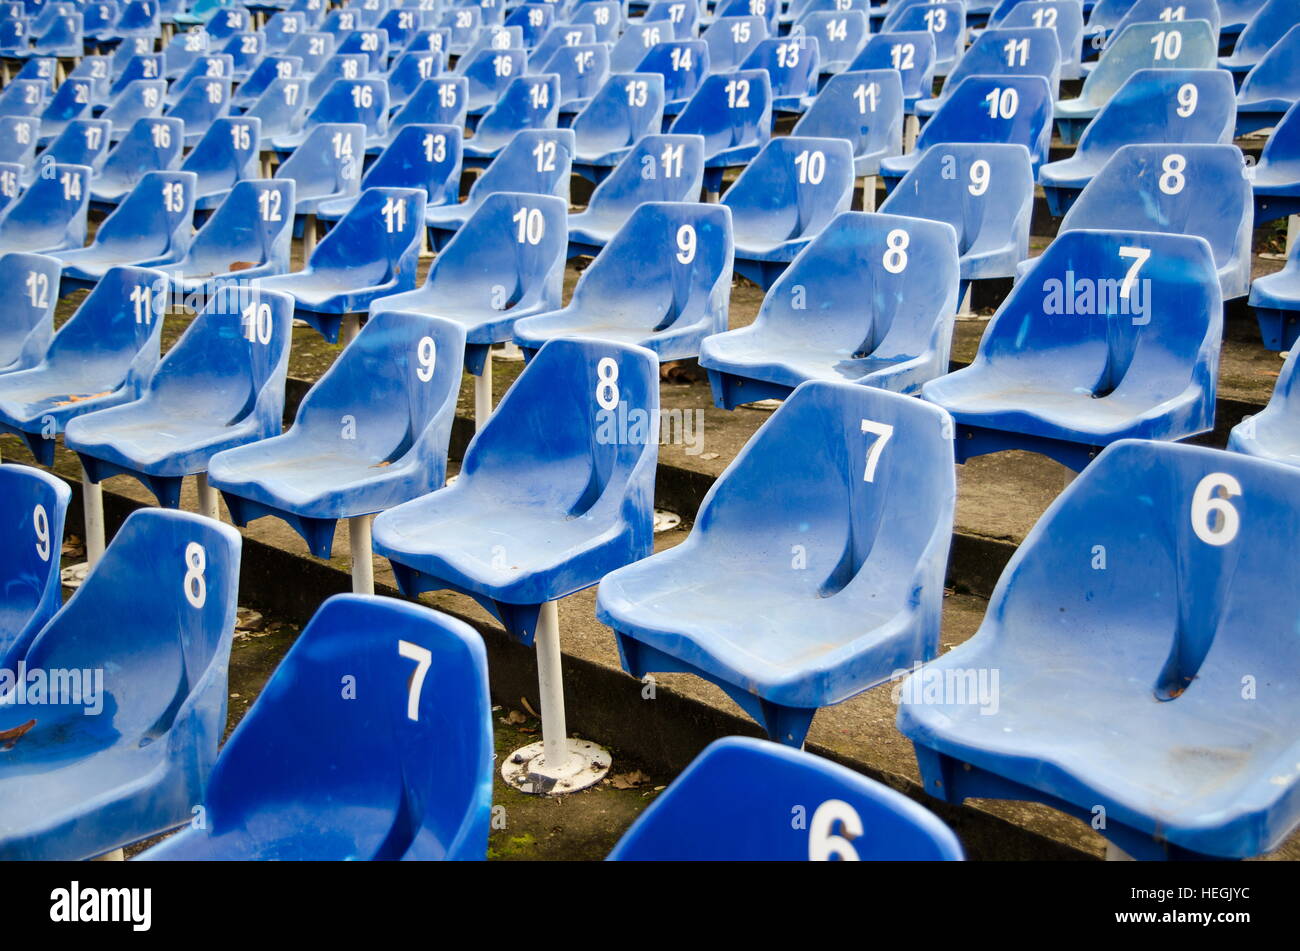 Empty auditorium with blue numbered plastic chairs Stock Photo